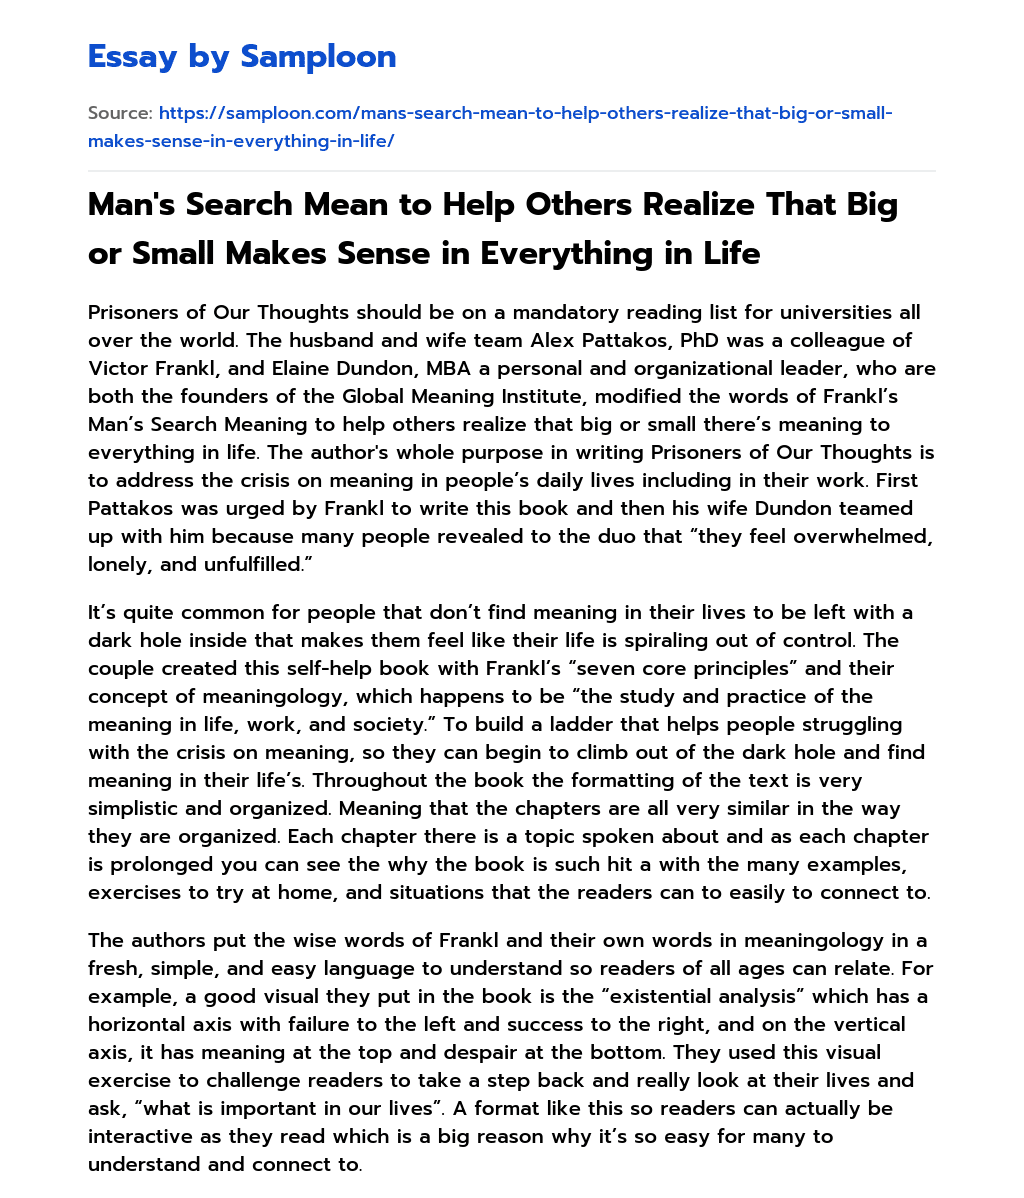 Man’s Search Mean to Help Others Realize That Big or Small Makes Sense in Everything in Life essay